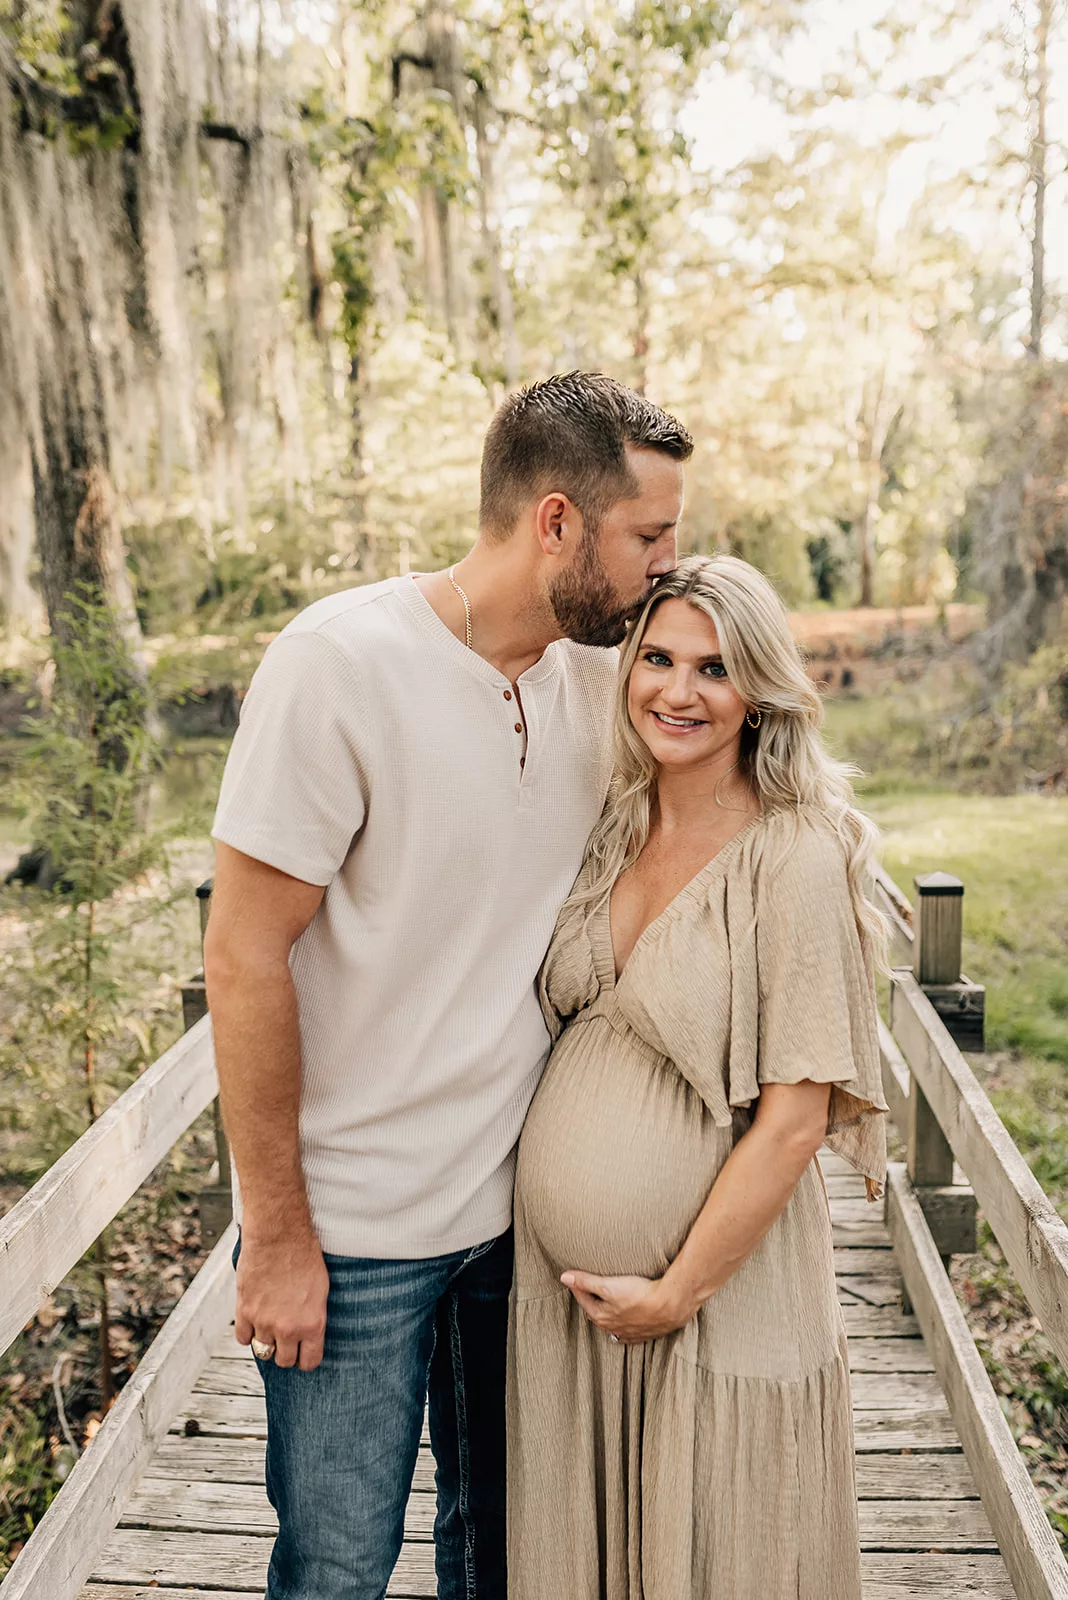 A mom to be stands on a wooden boardwalk holding her bump while her husband kisses her head